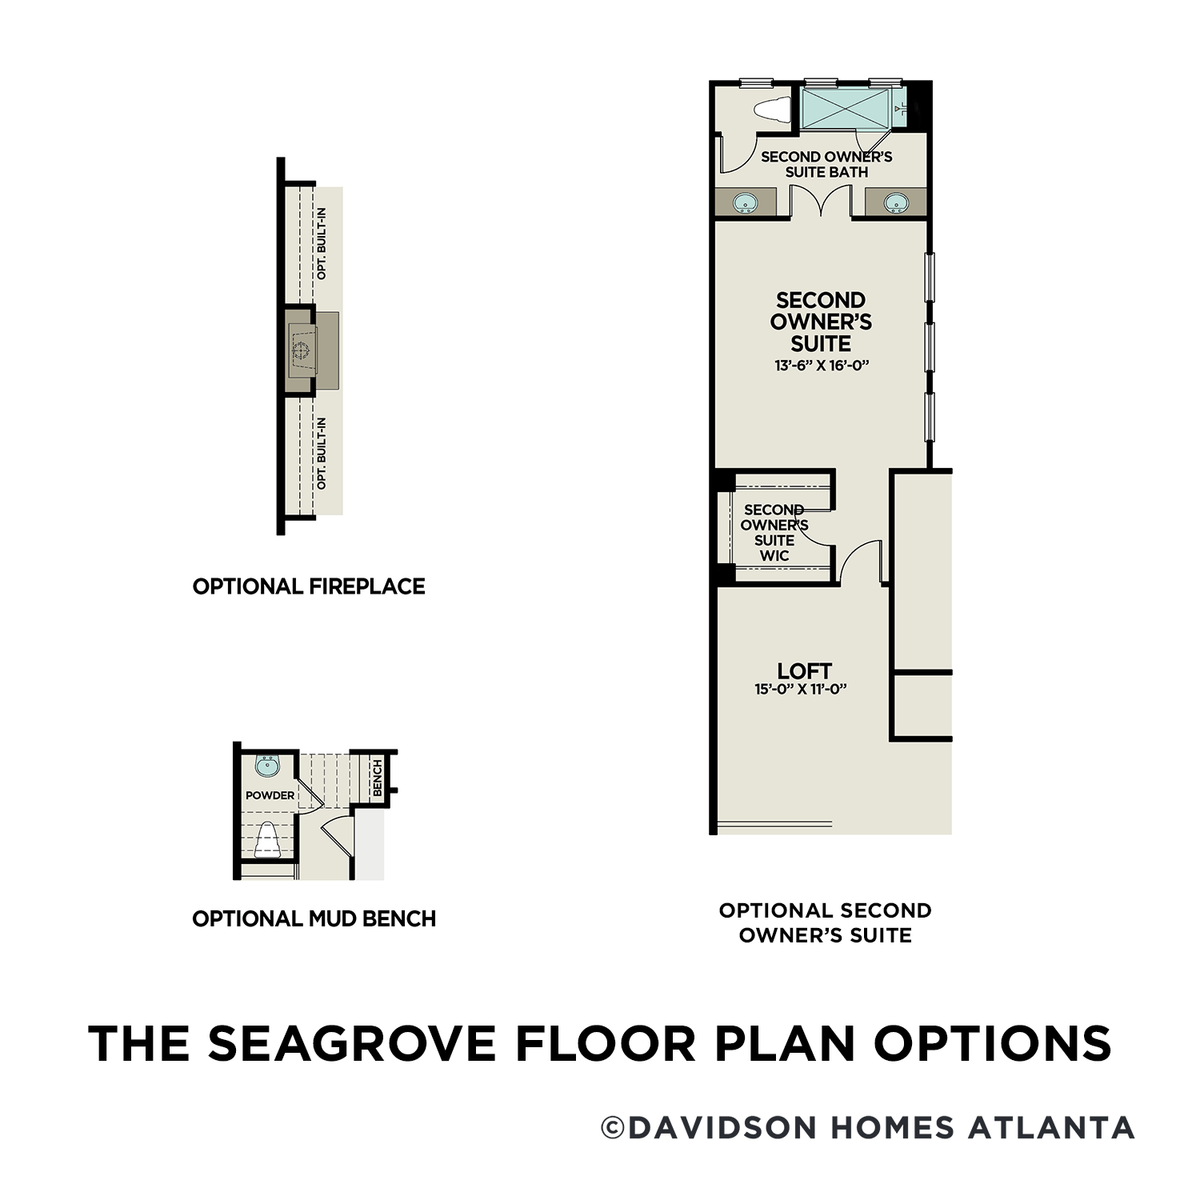 3 - The Seagrove A buildable floor plan layout in Davidson Homes' The Village at Towne Lake community.